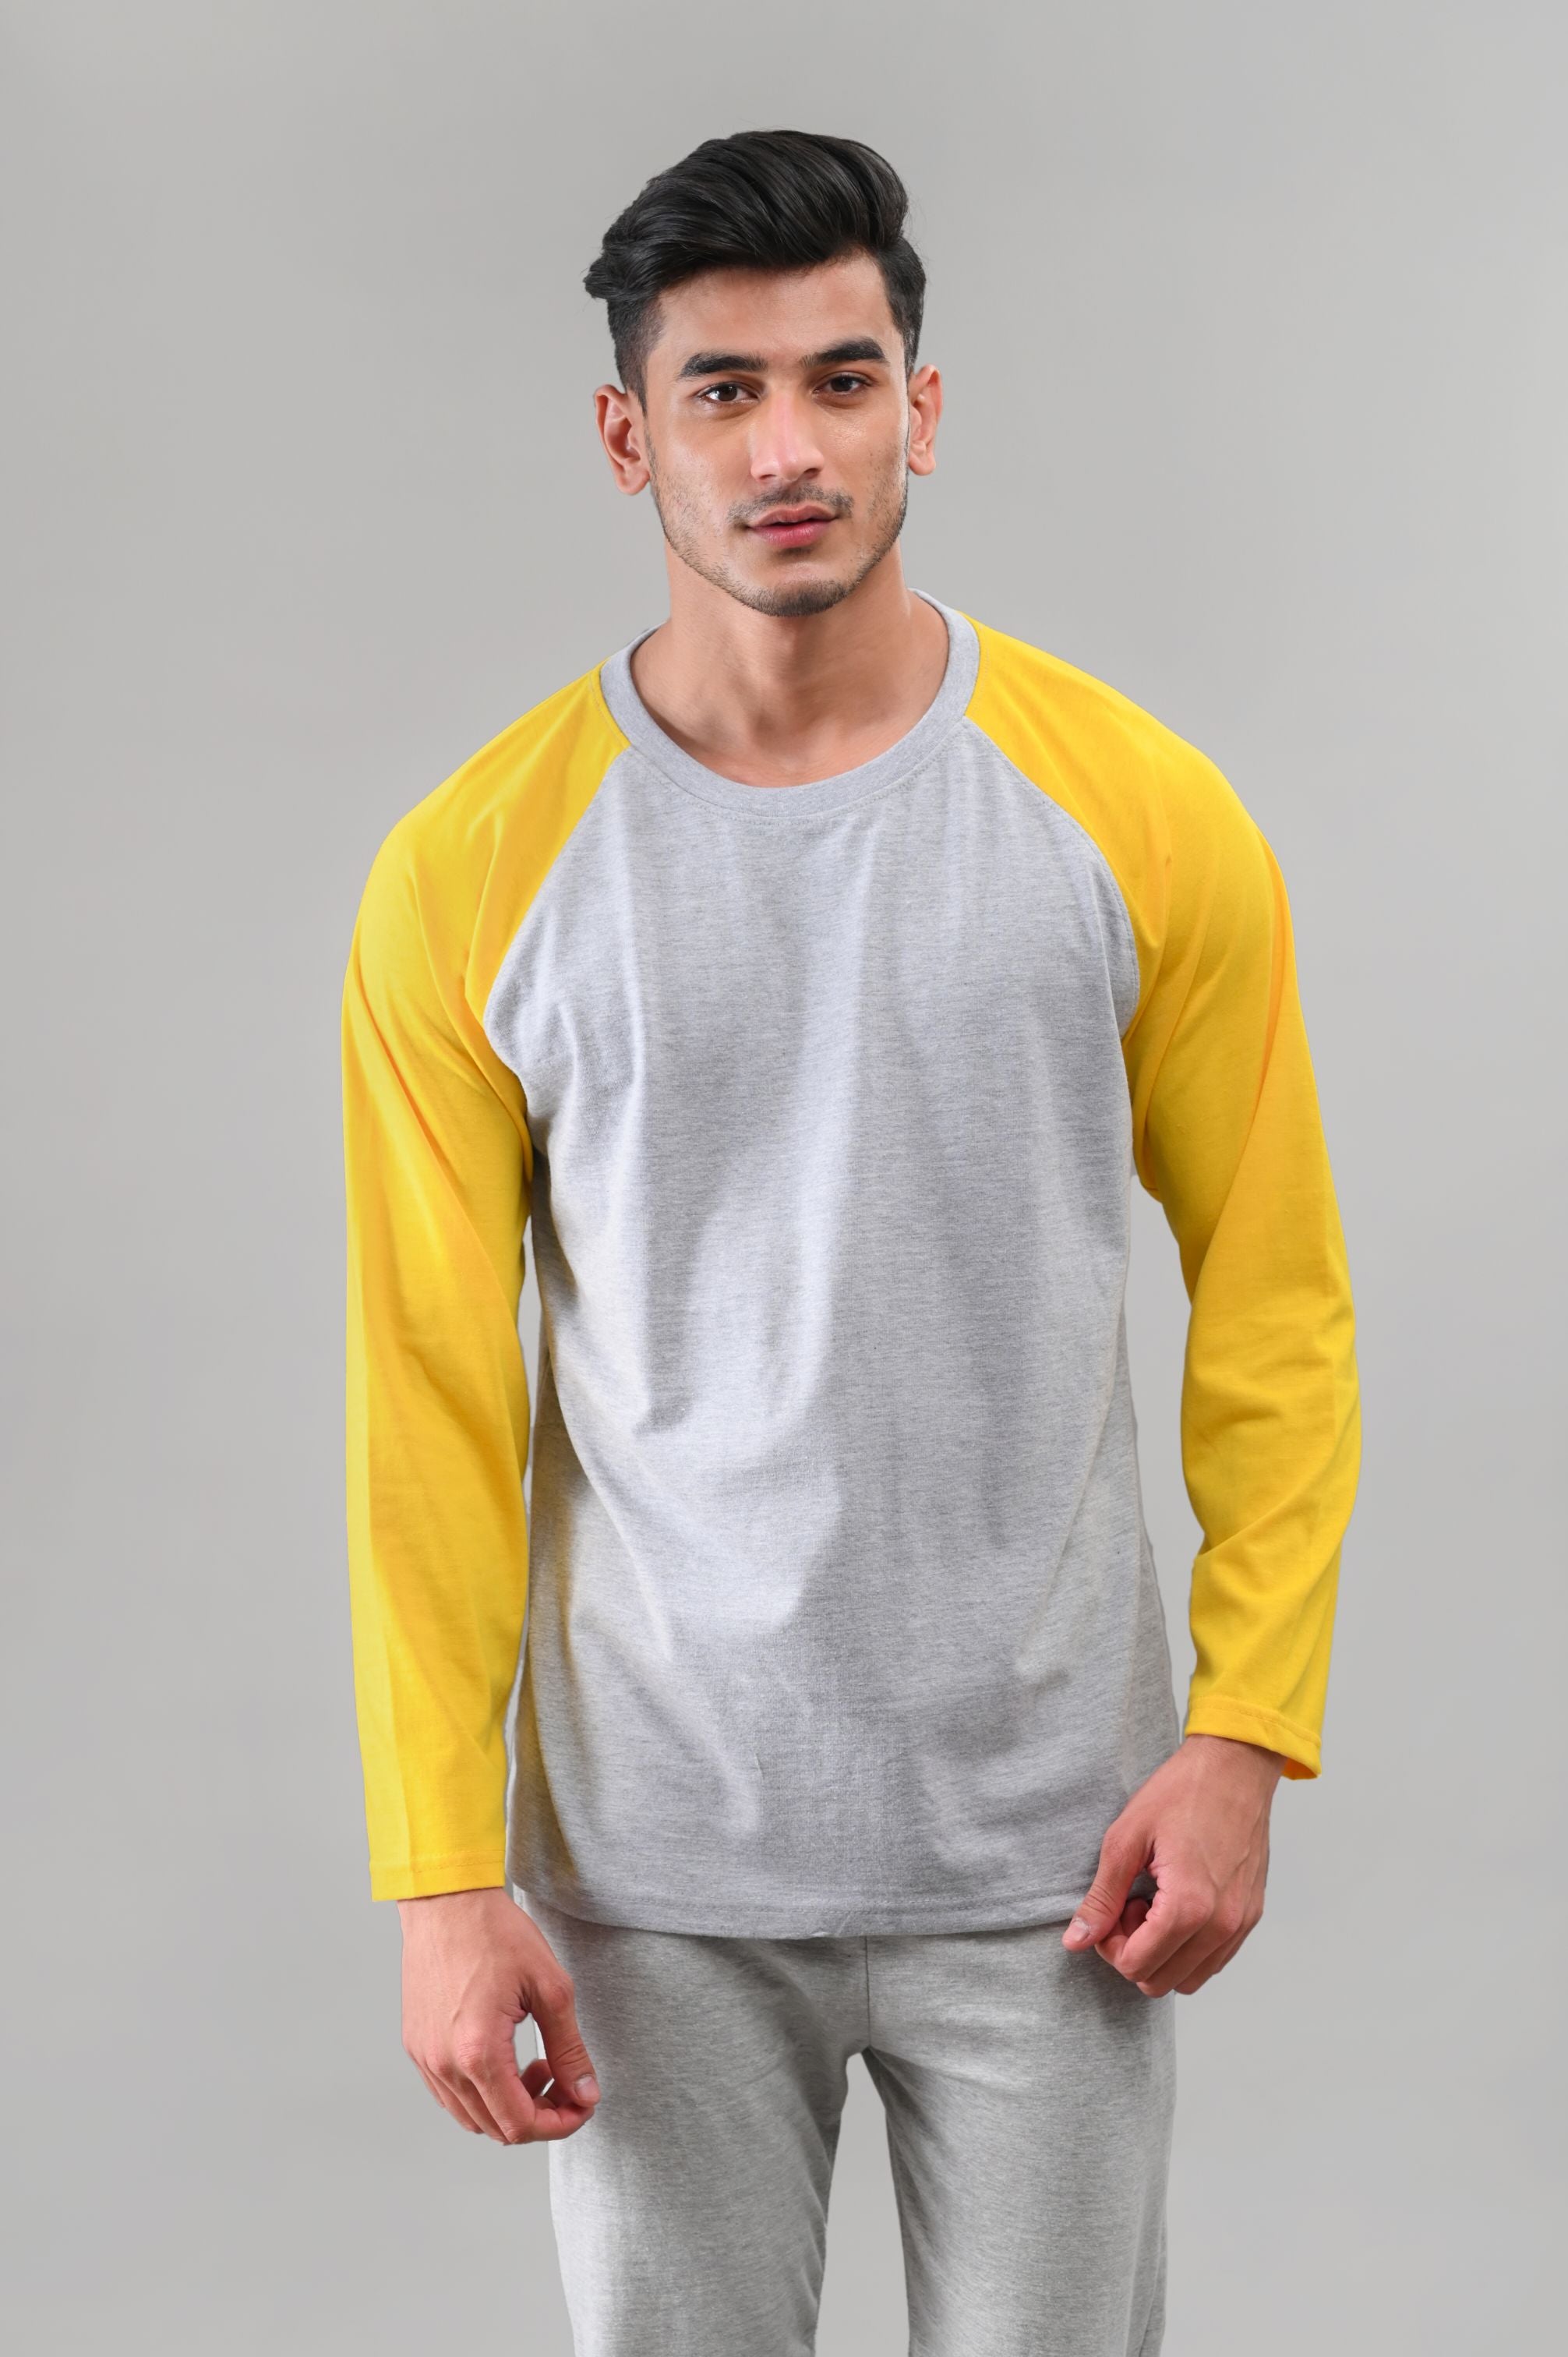 Yellow Raglan Full Sleeves T-Shirt - M - Checkmate Atelier - Official Online Store